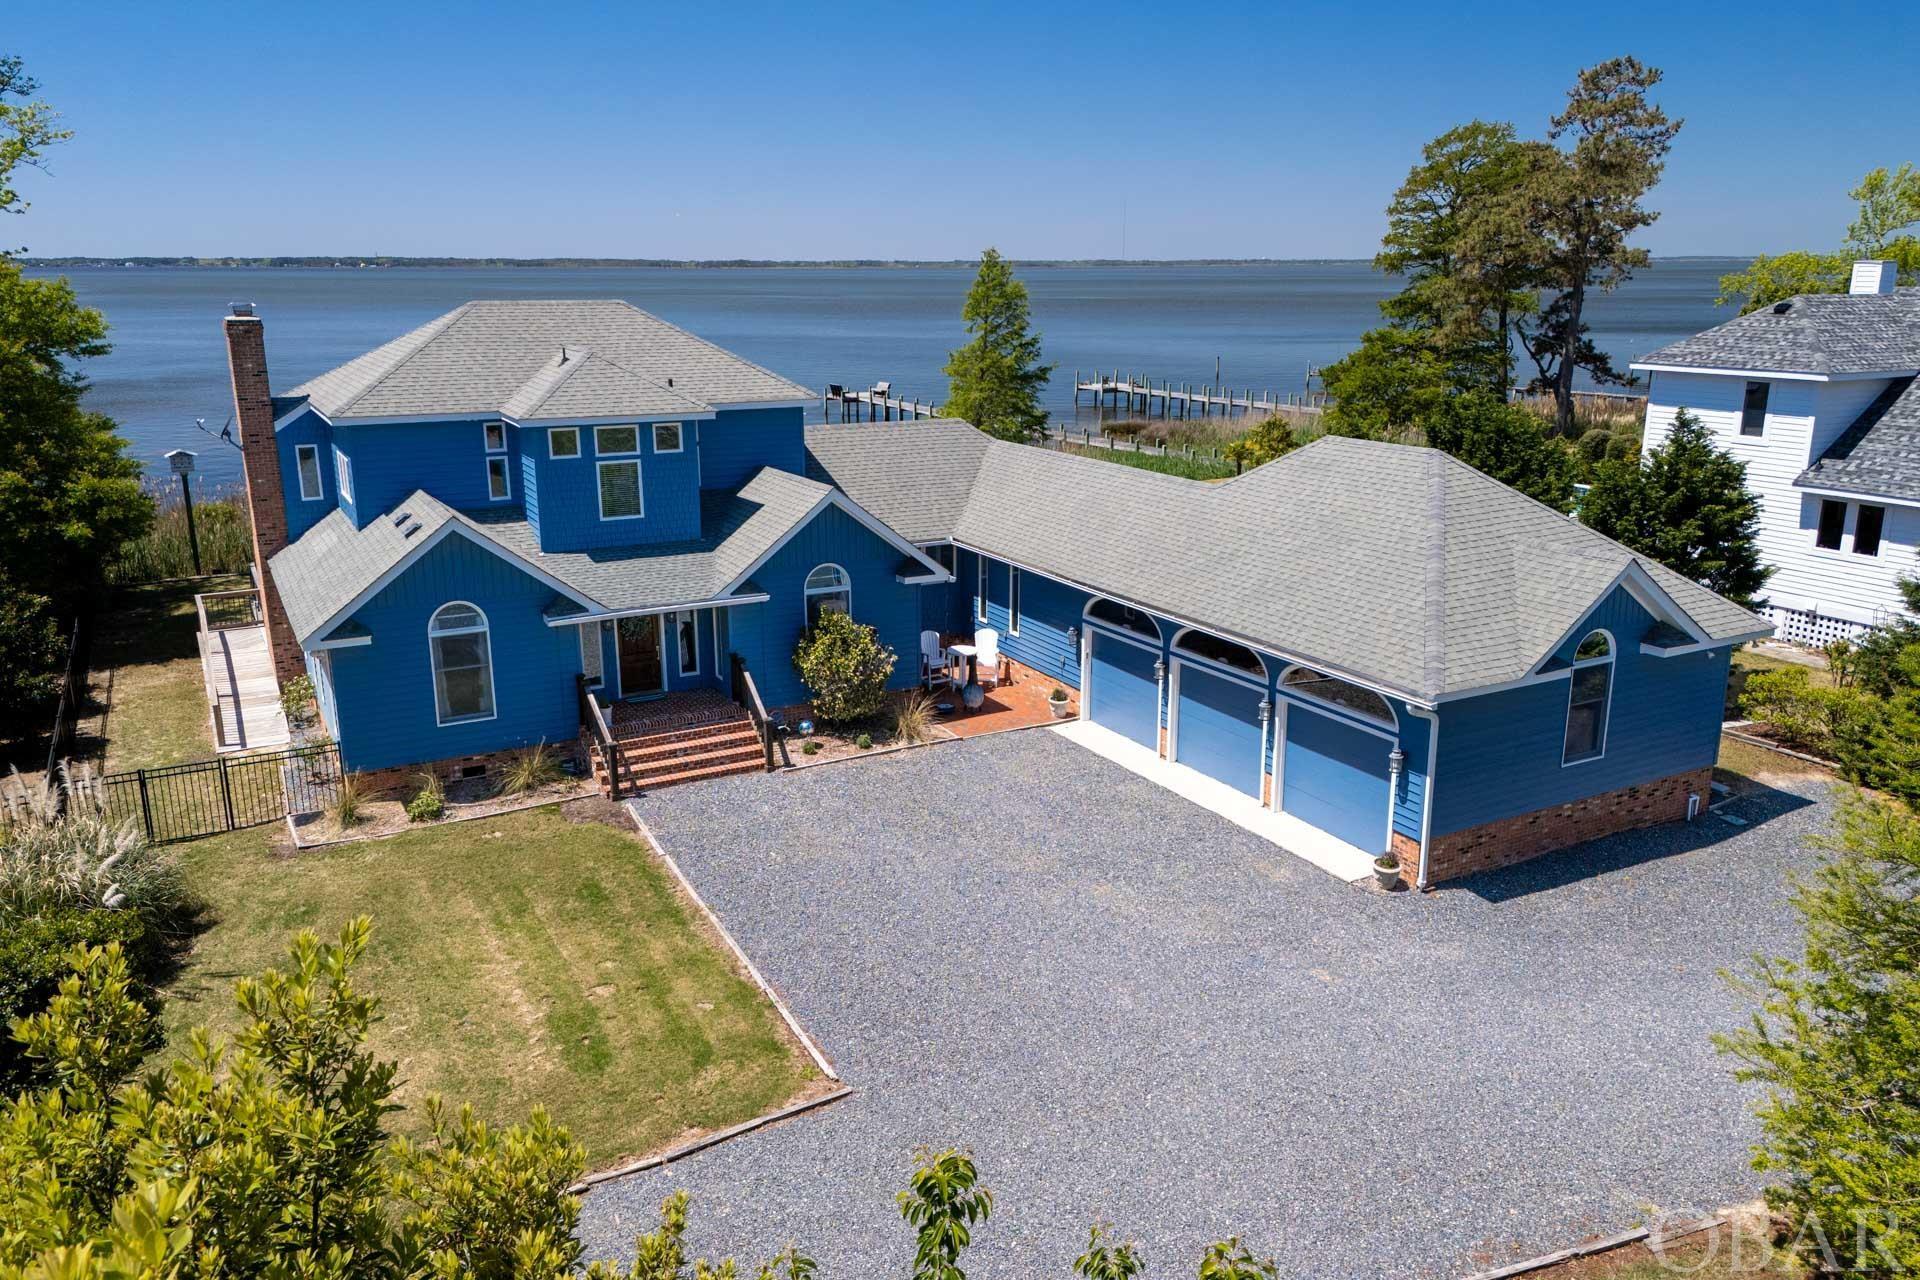 4004 Martins Point Road, Kitty Hawk, NC 27949, 3 Bedrooms Bedrooms, ,3 BathroomsBathrooms,Residential,For sale,Martins Point Road,125534